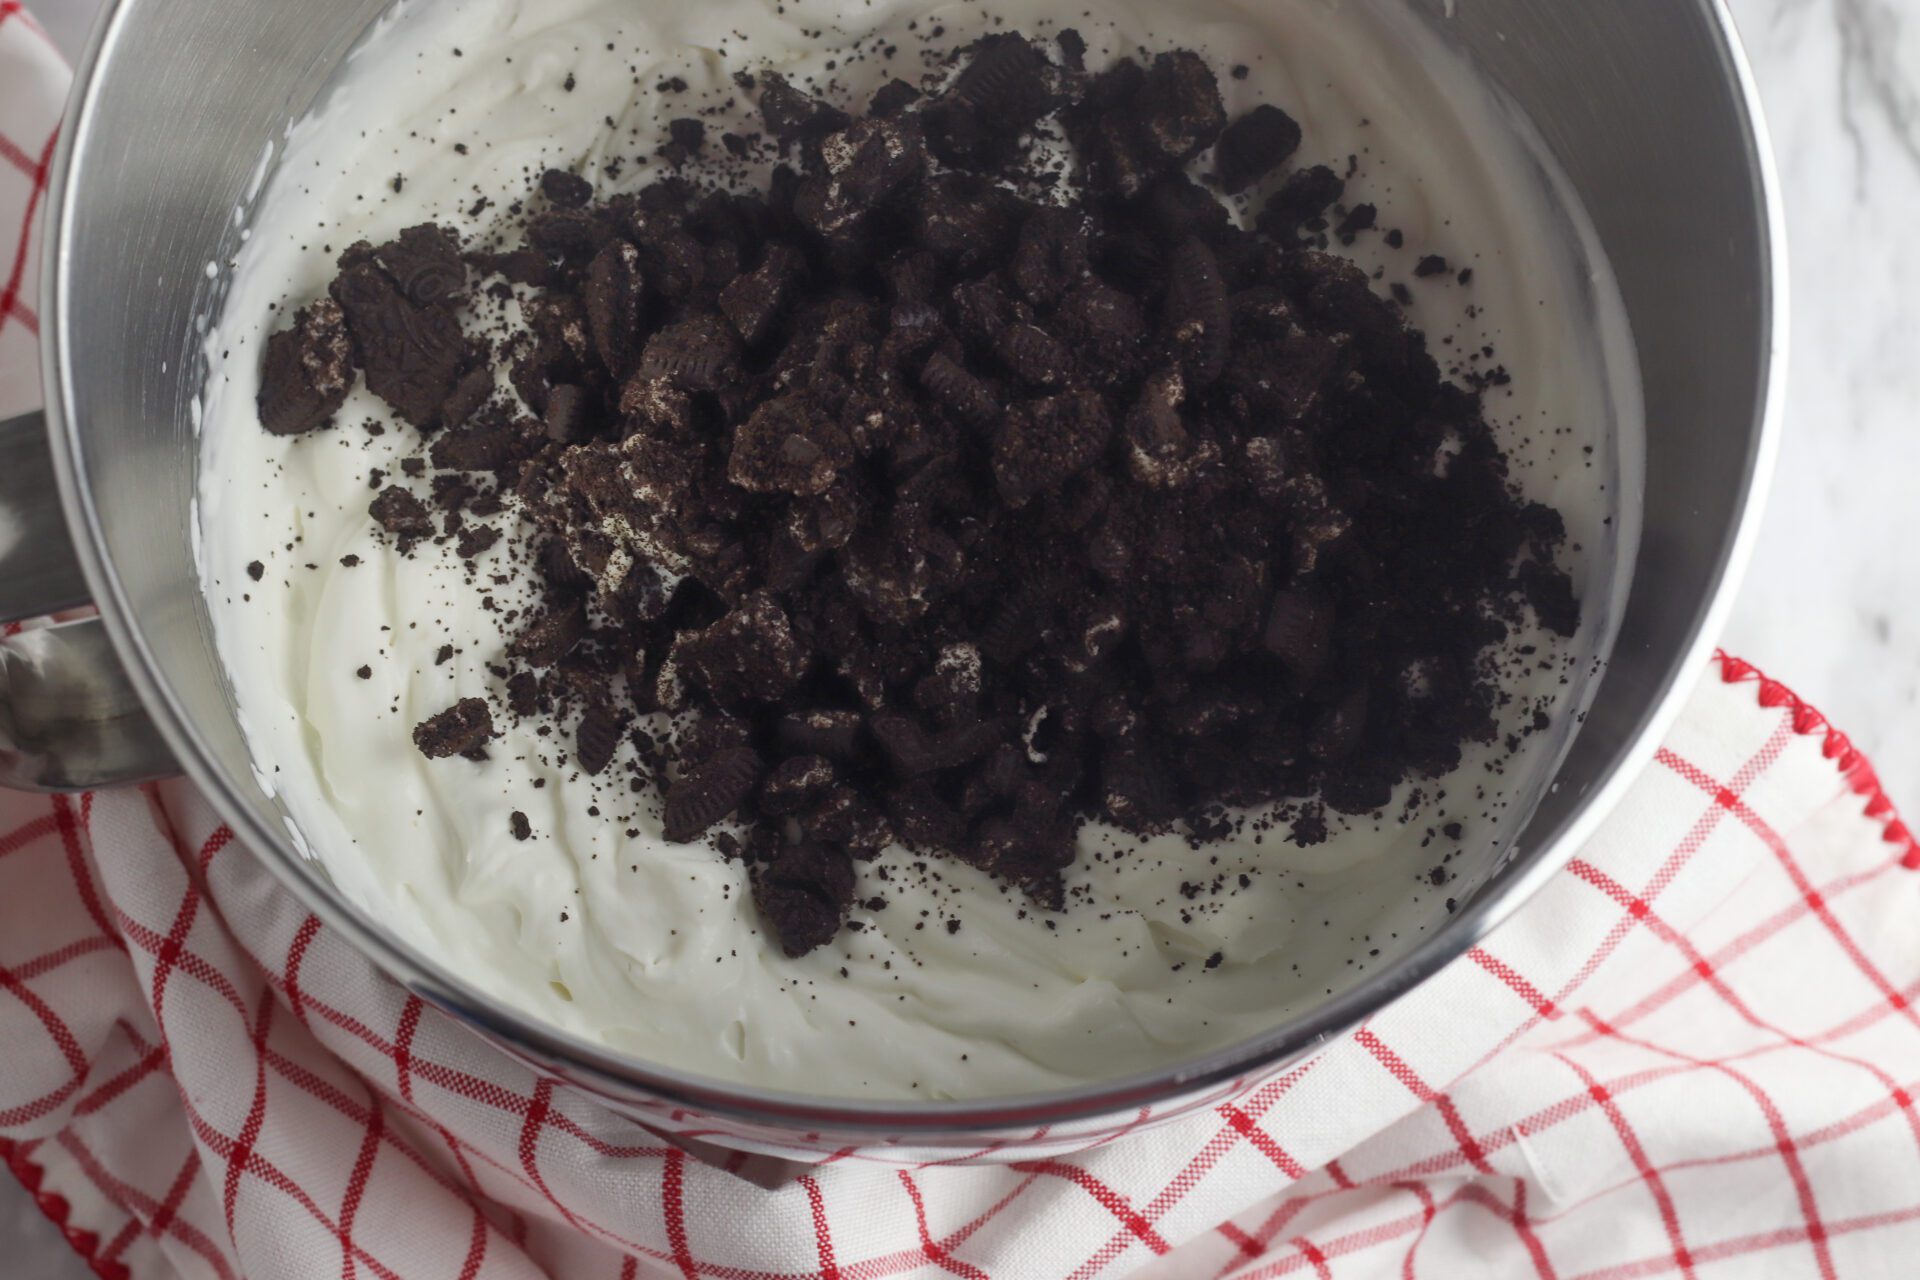 Oreo Ice Cream that you can make at home without special tools or machines? Yes please! This homemade Oreo Ice Cream is absolutely delicious & so easy to make!